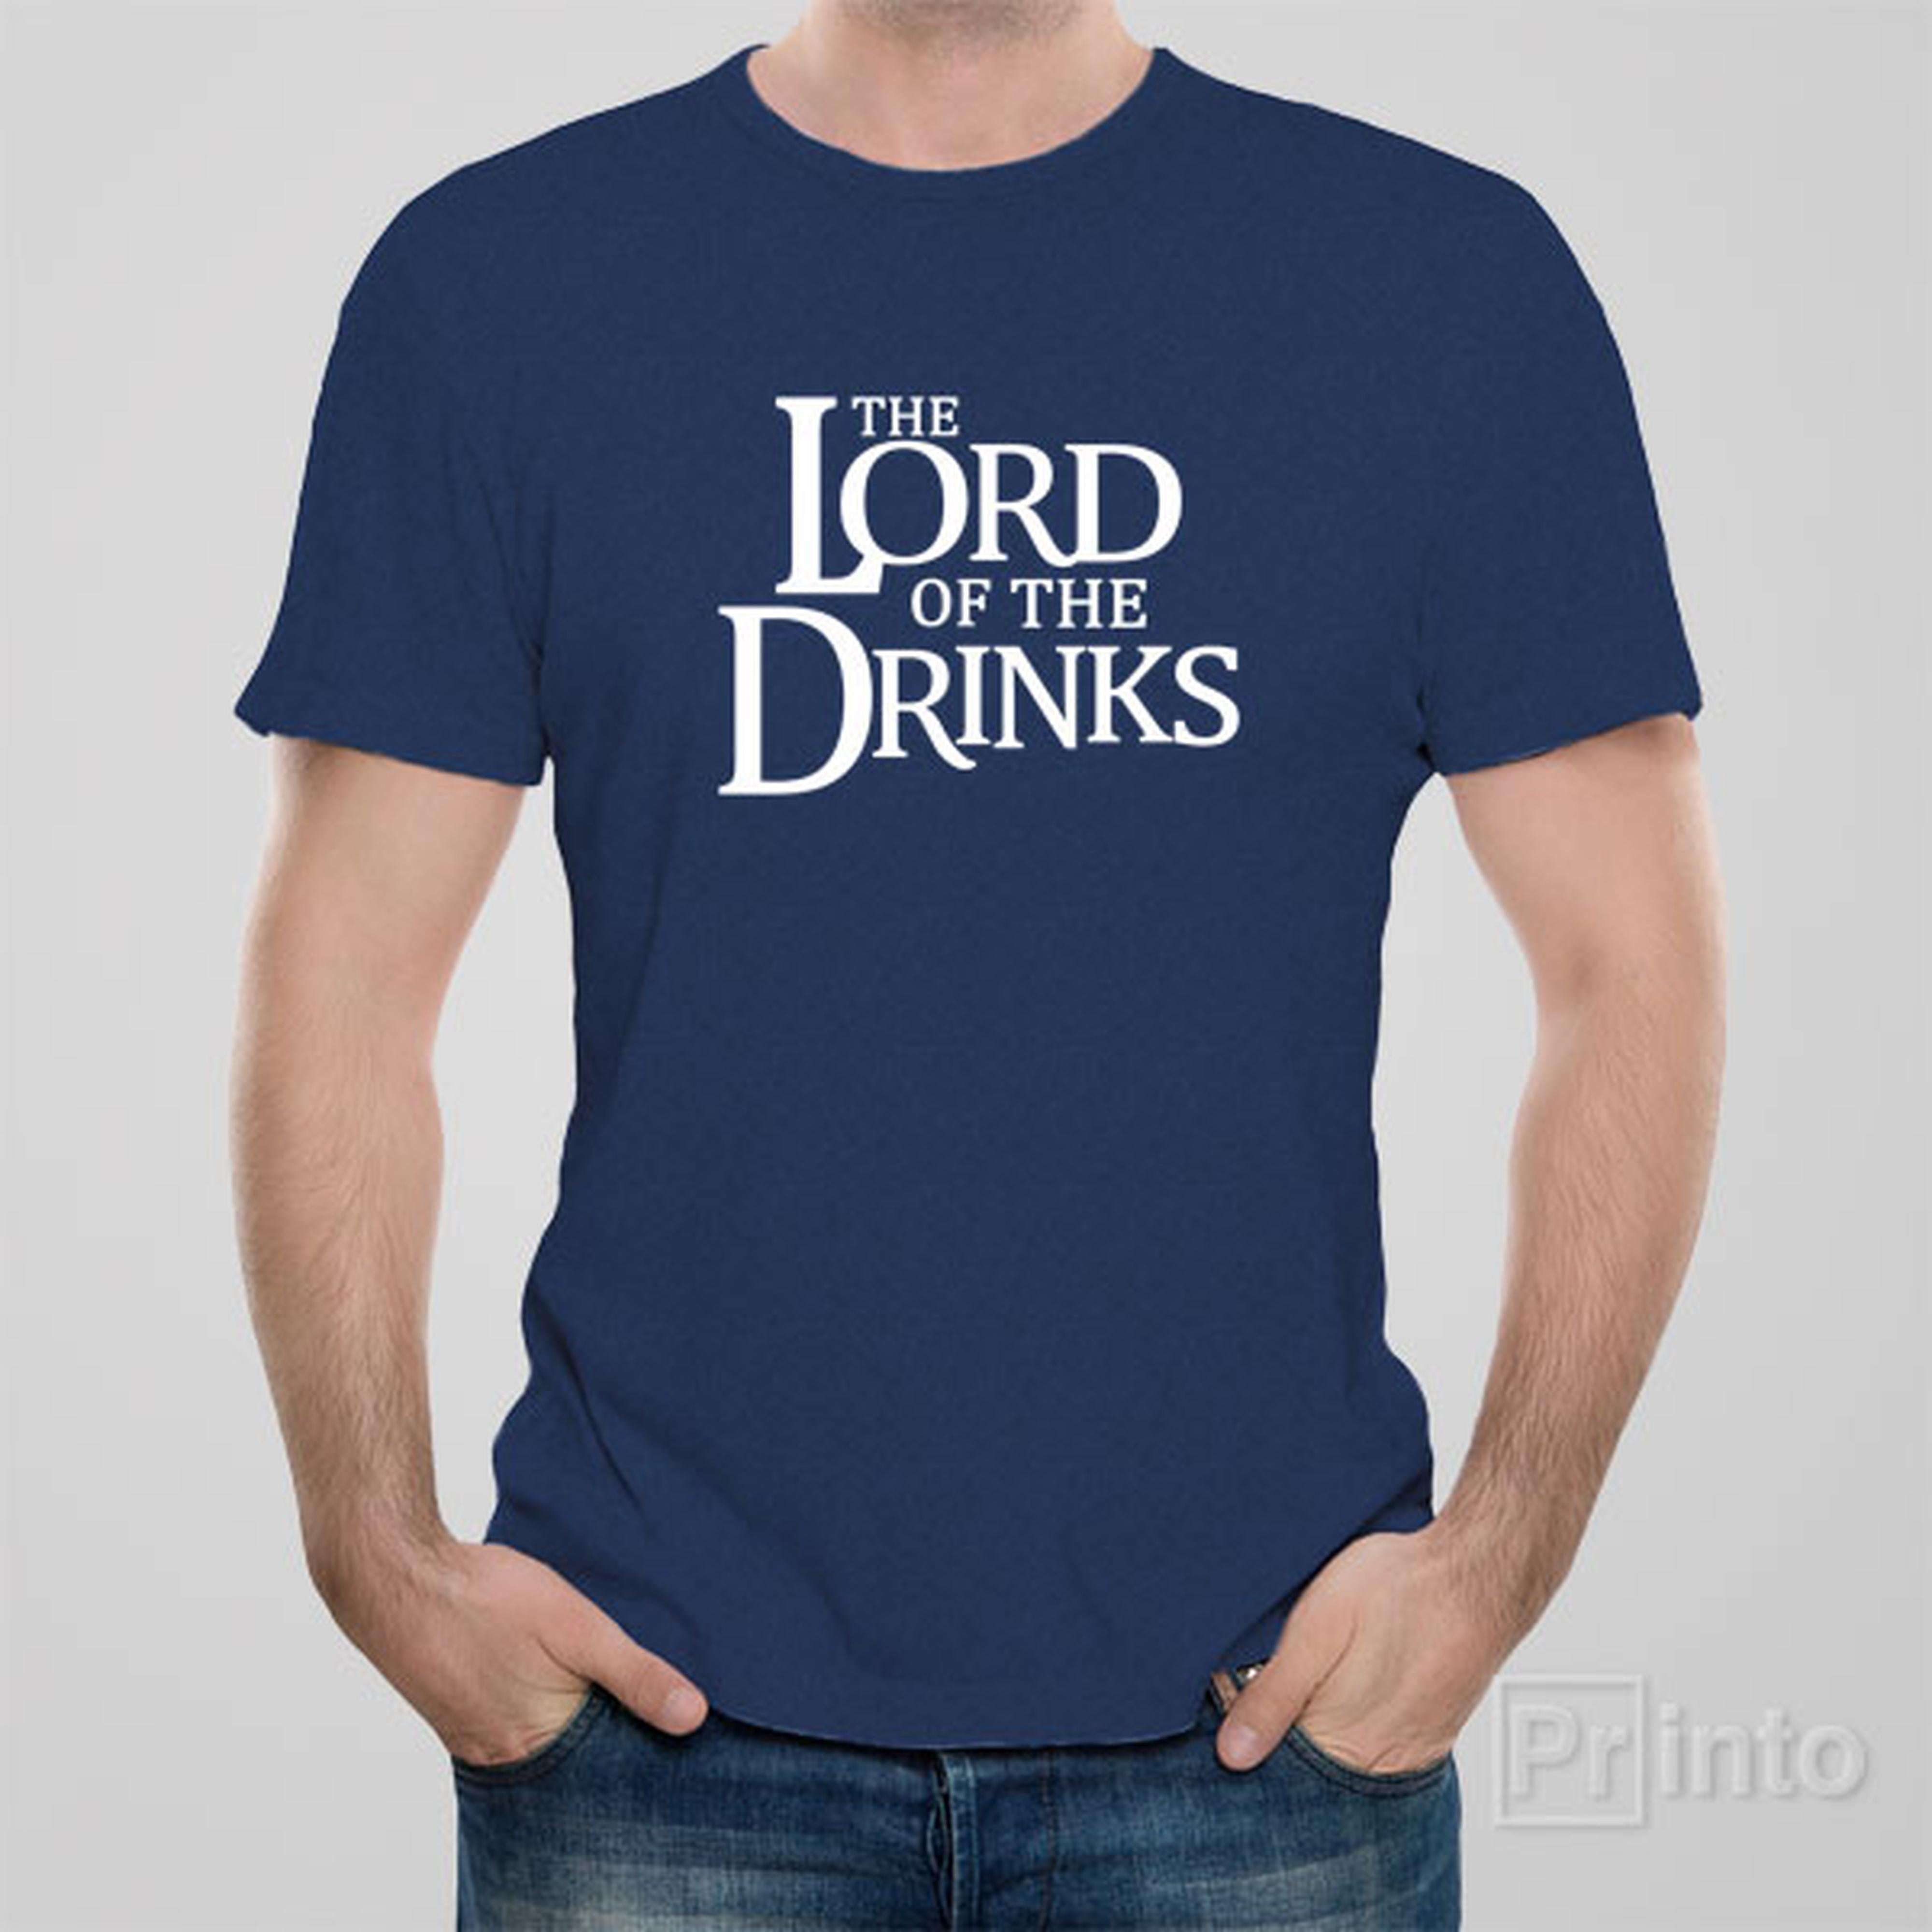 the-lord-of-the-drinks-t-shirt